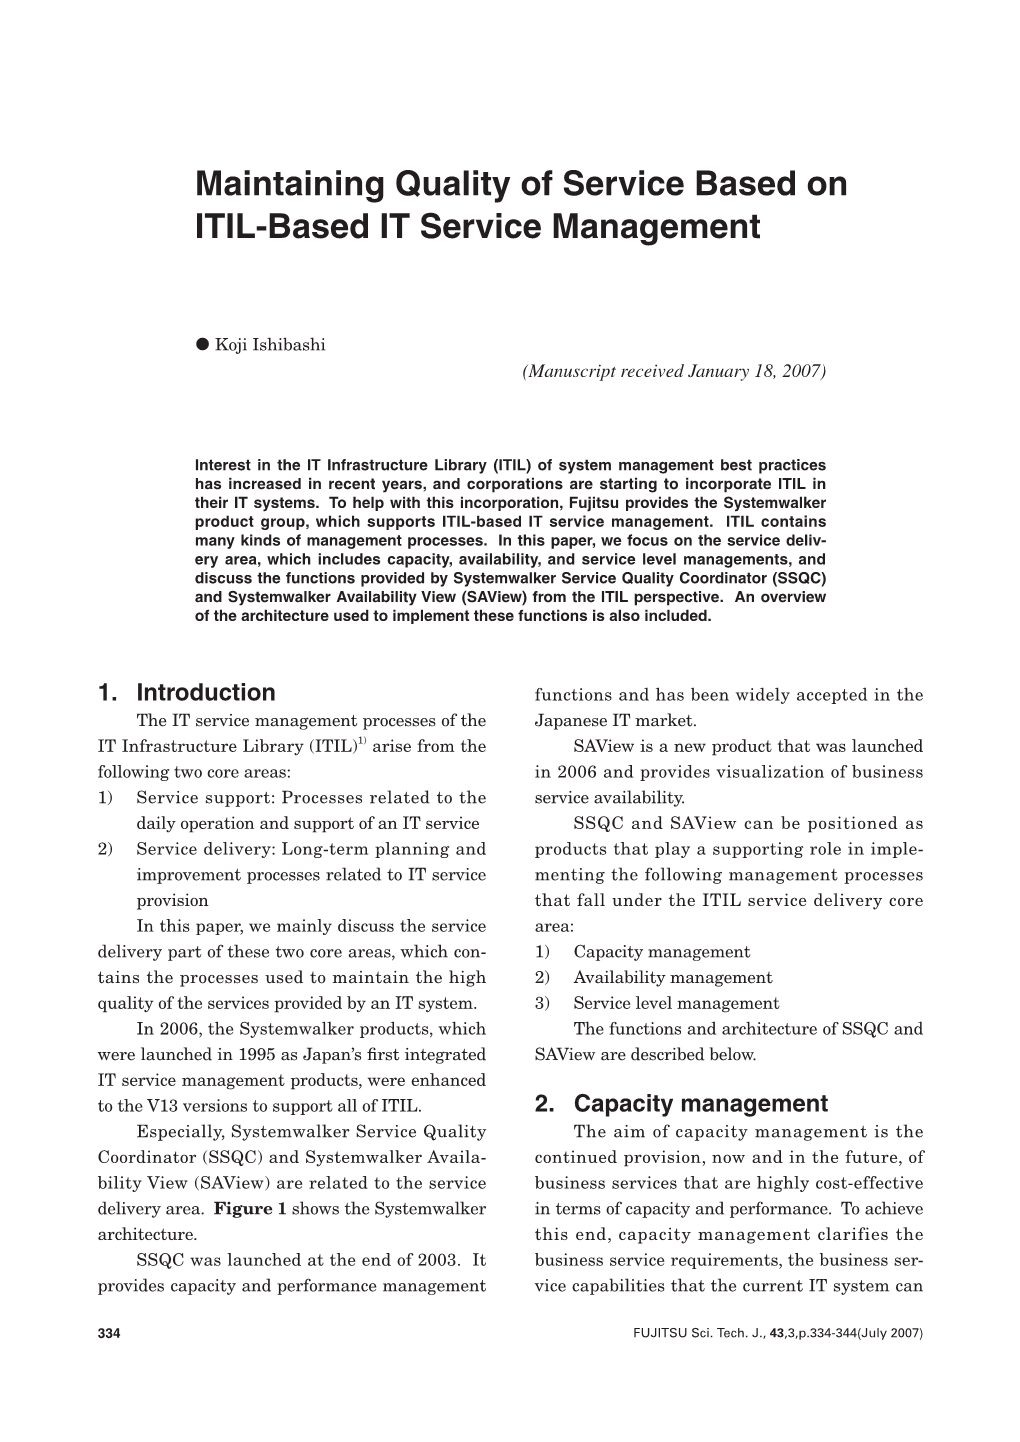 Maintaining Quality of Service Based on ITIL-Based IT Service Management